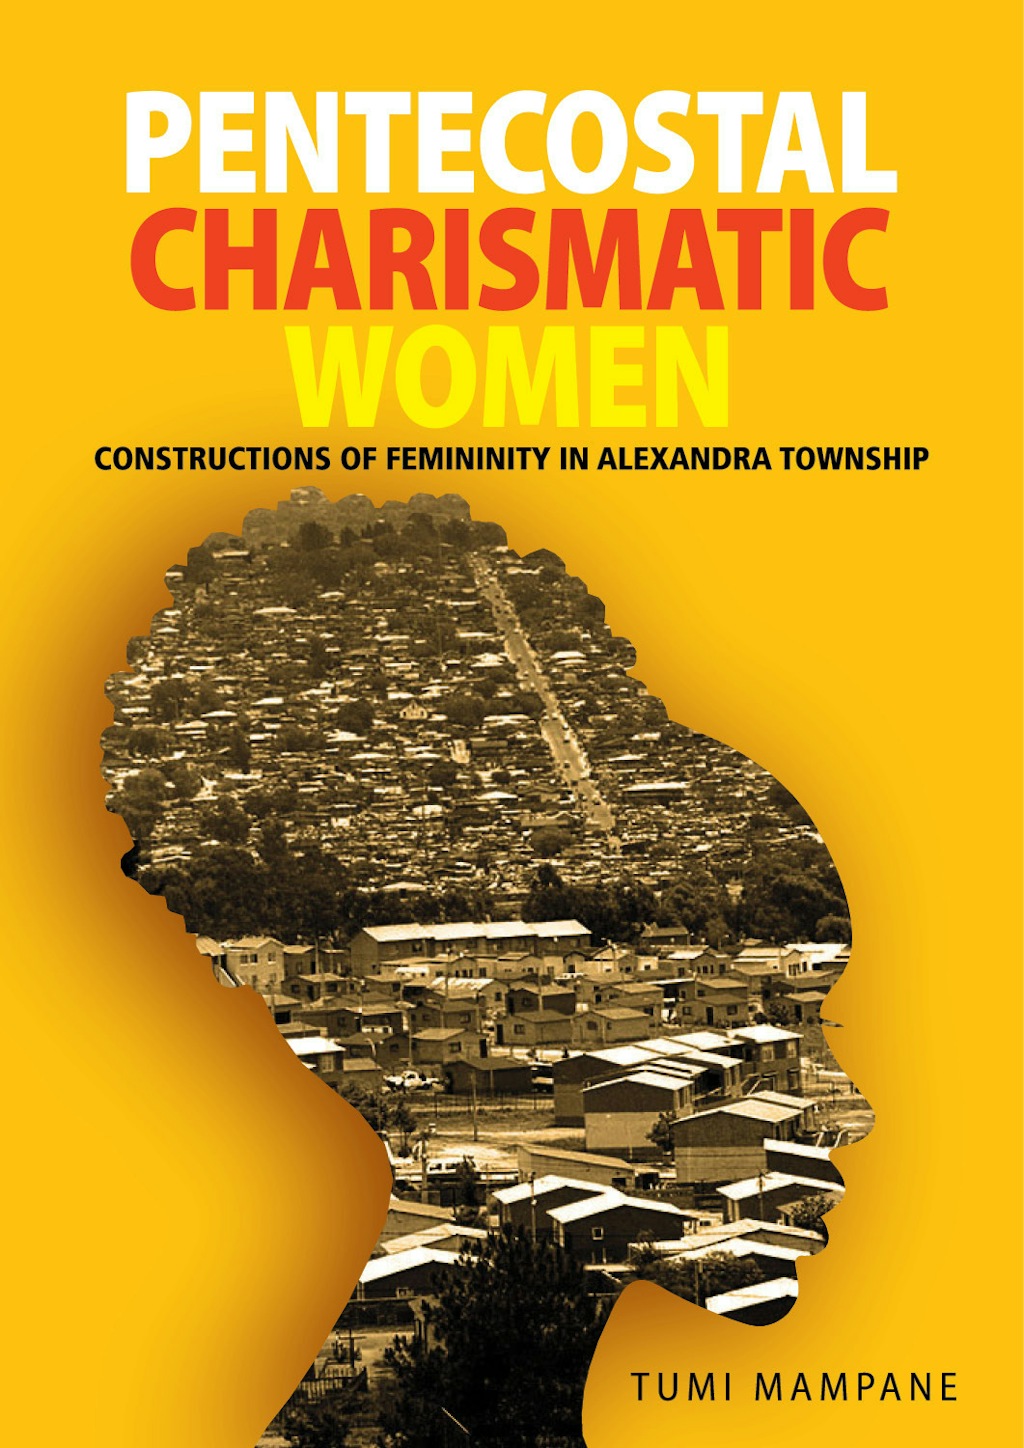 Pentecostal Charismatic Women: Constructions of Femininity in Alexandra Township – The Human Sciences Research Council (HSRC)